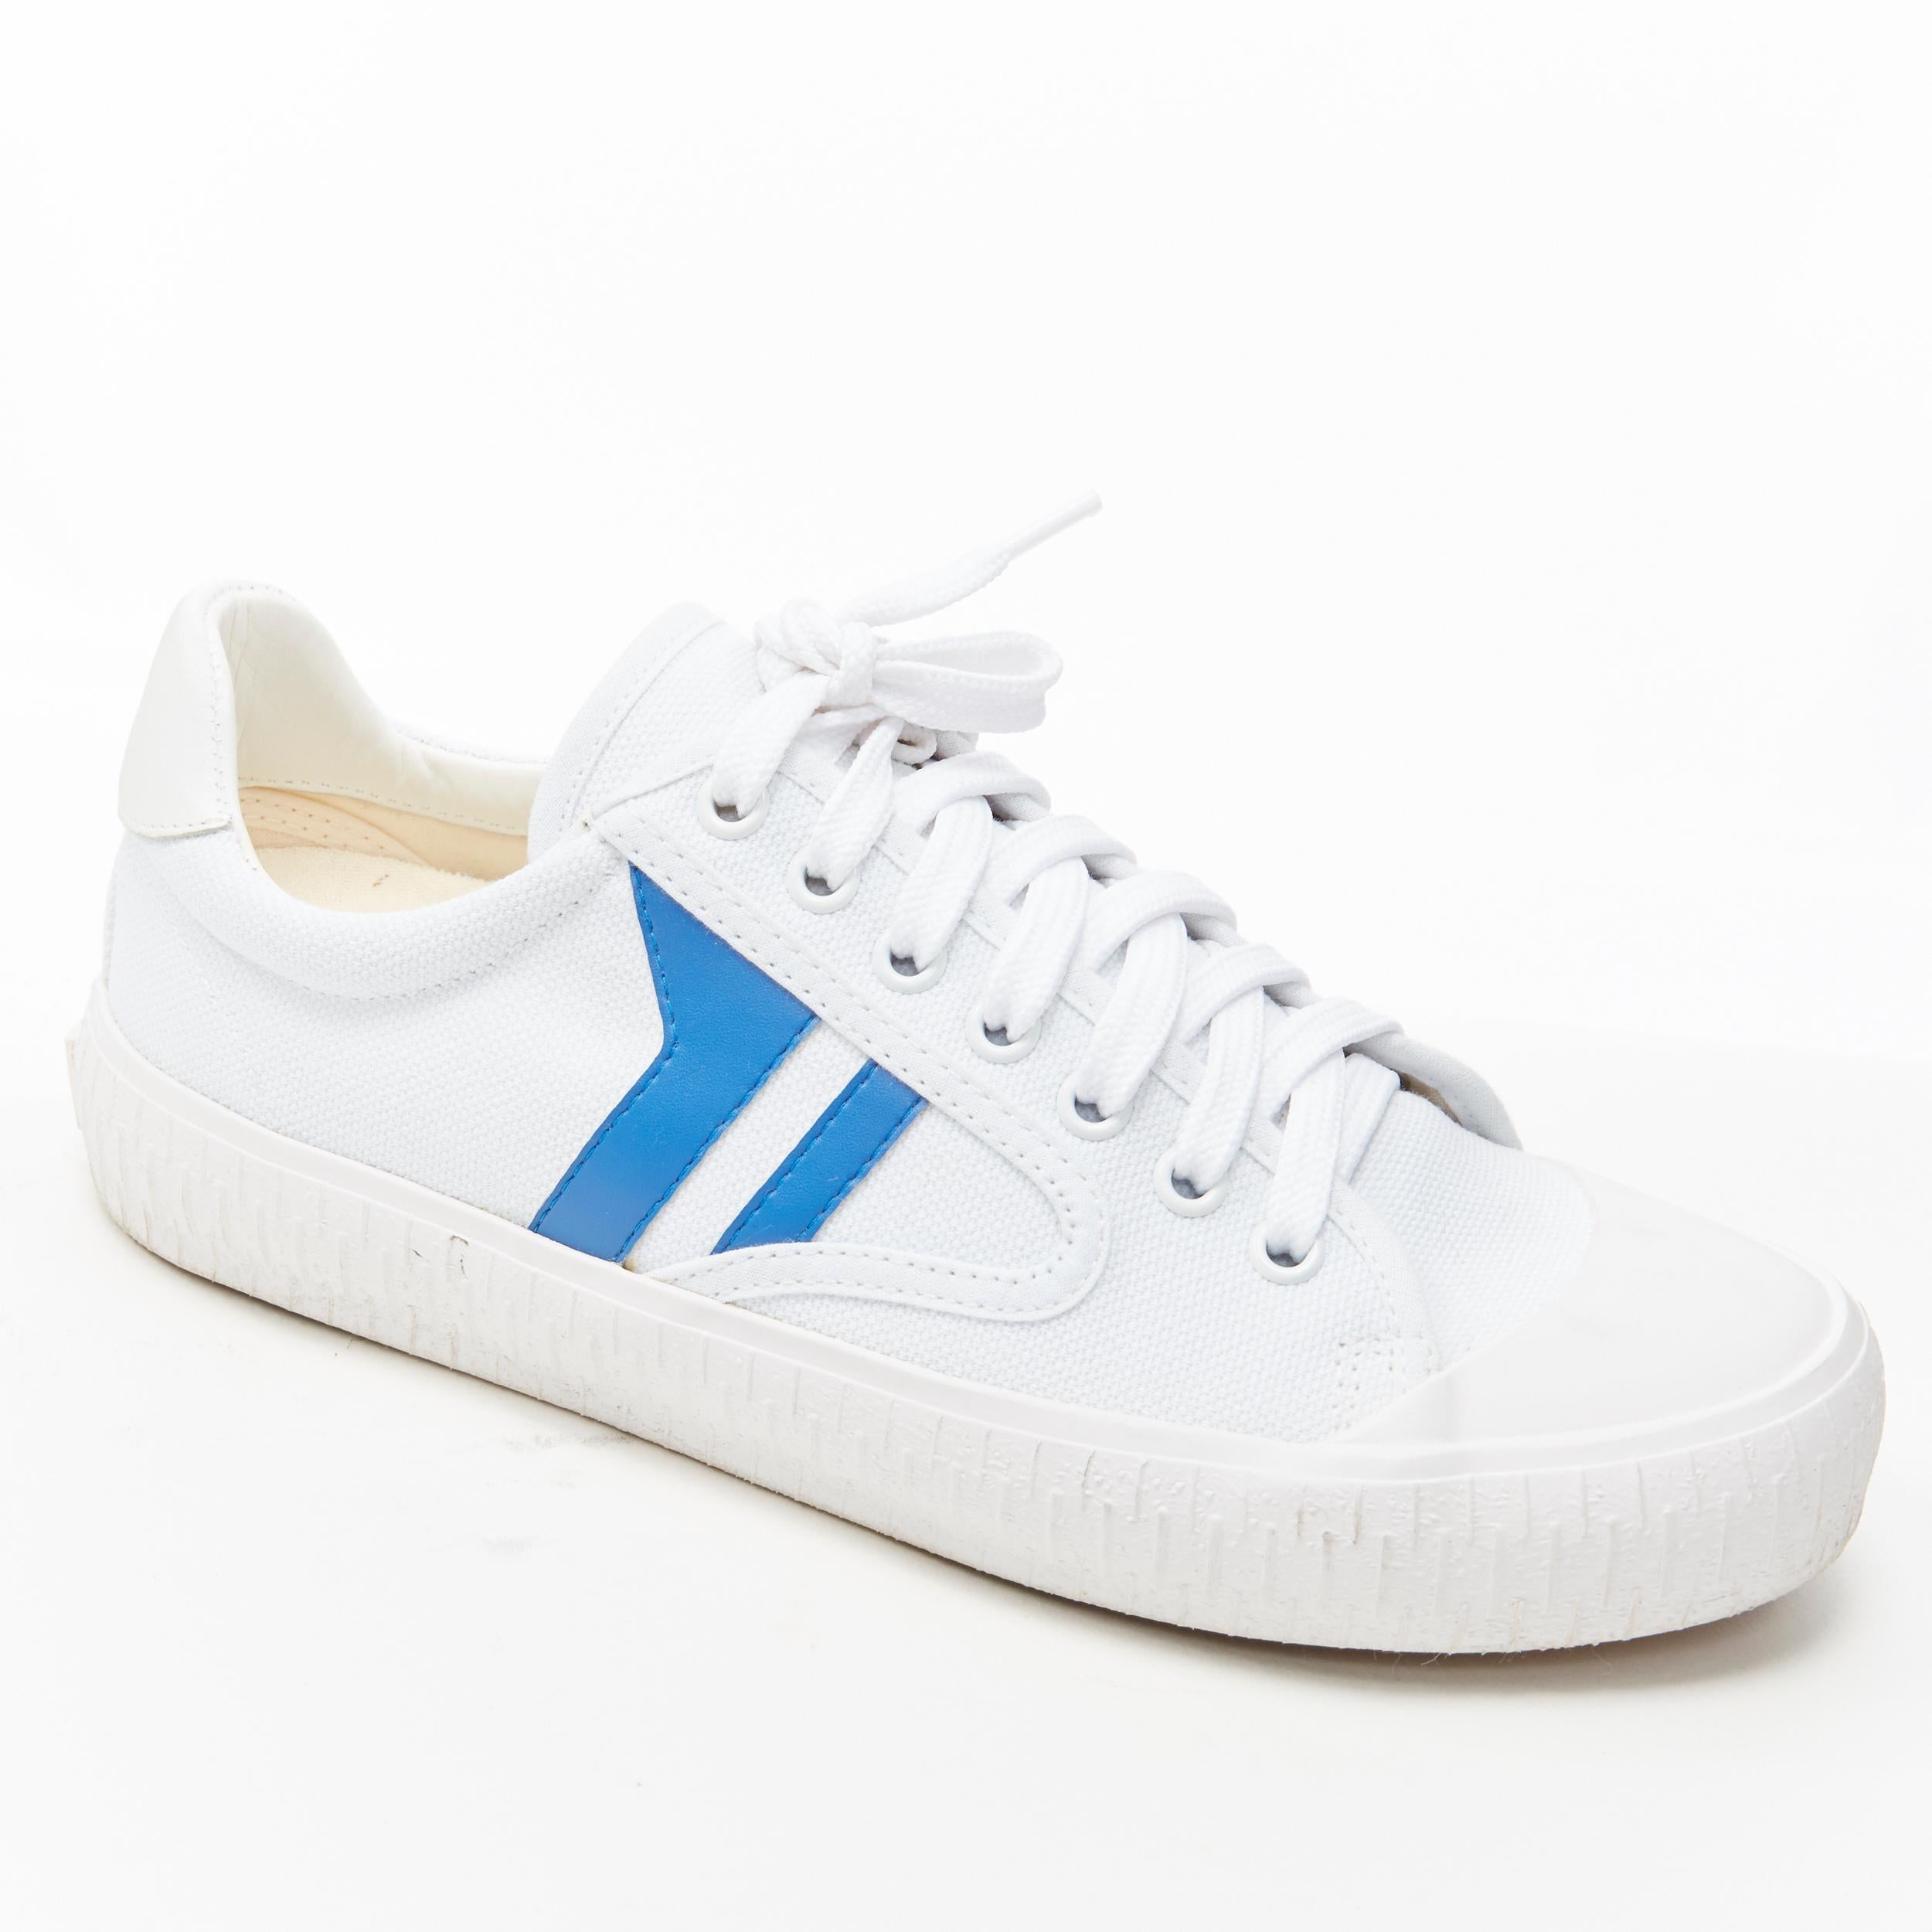 OLD CELINE white blue graphic canvas lace up casusal low top sneakers EU38 1